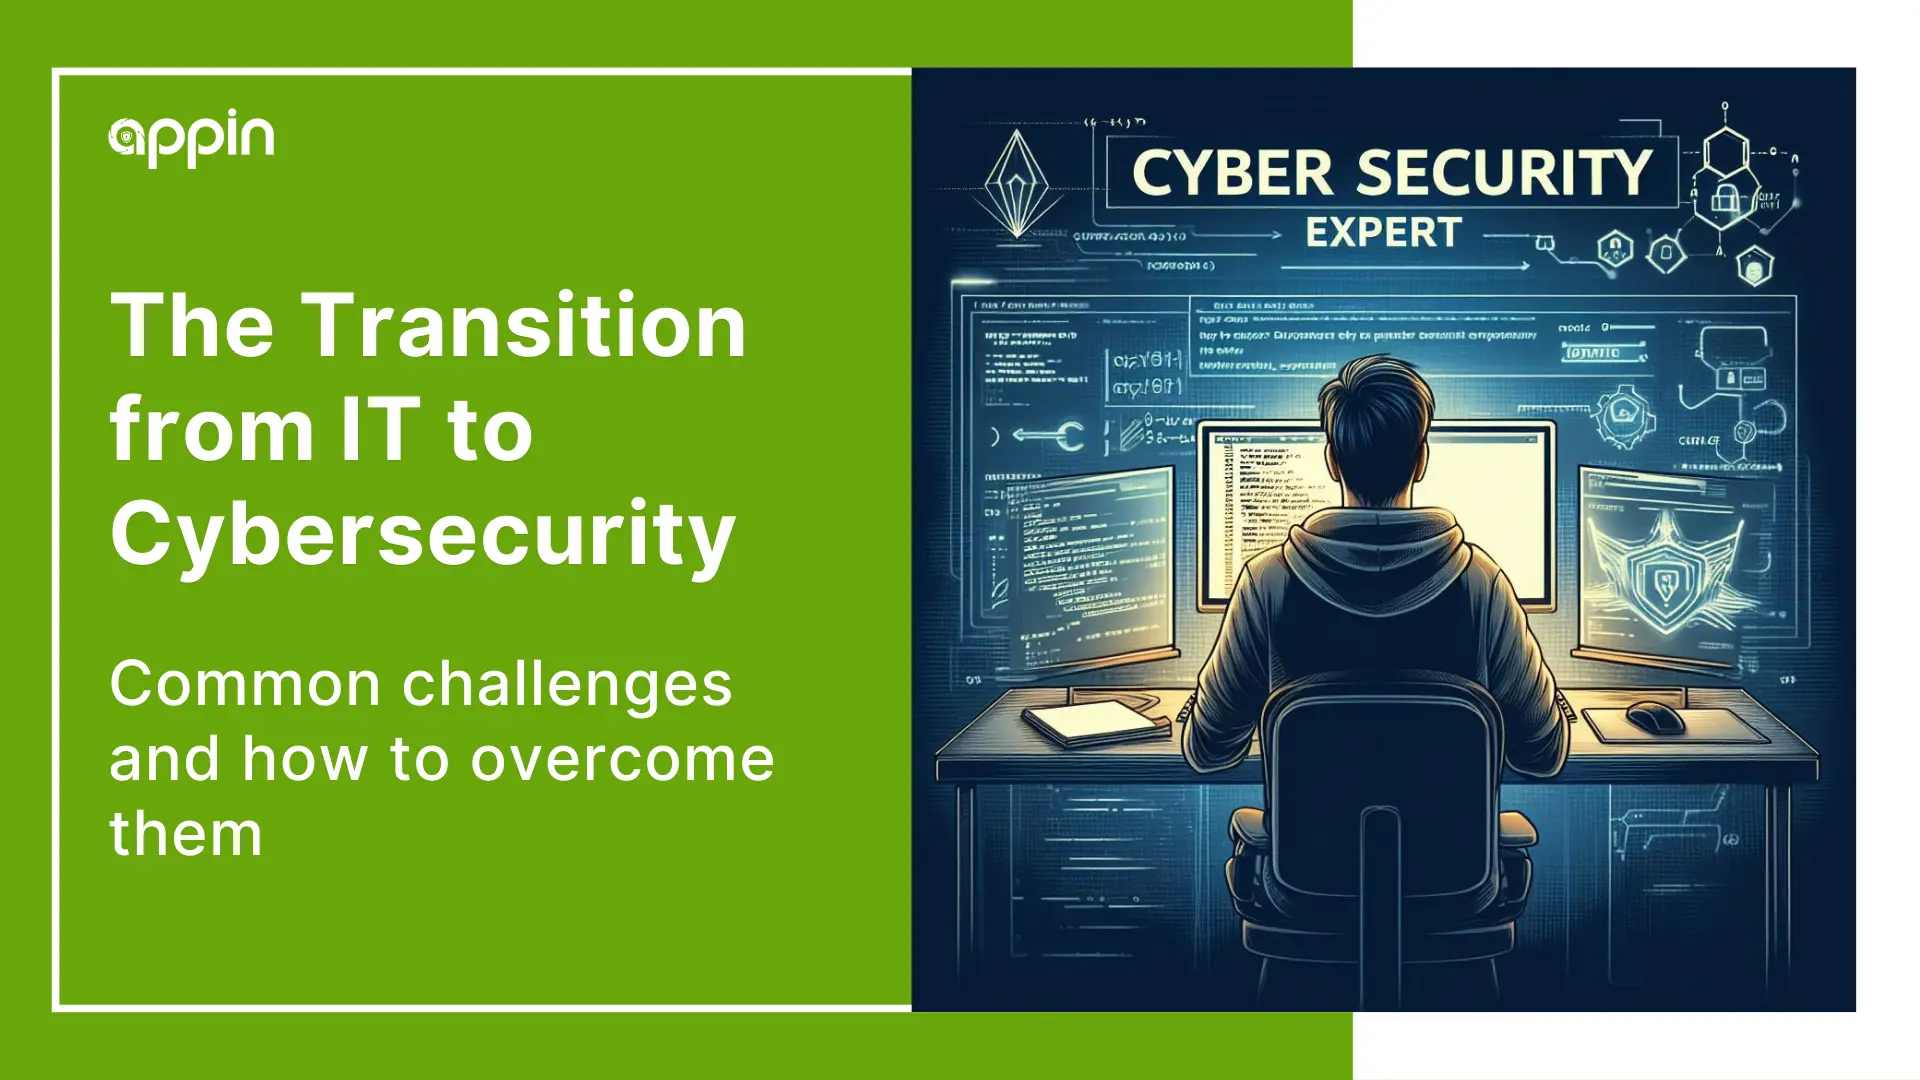 The Transition from IT to Cybersecurity